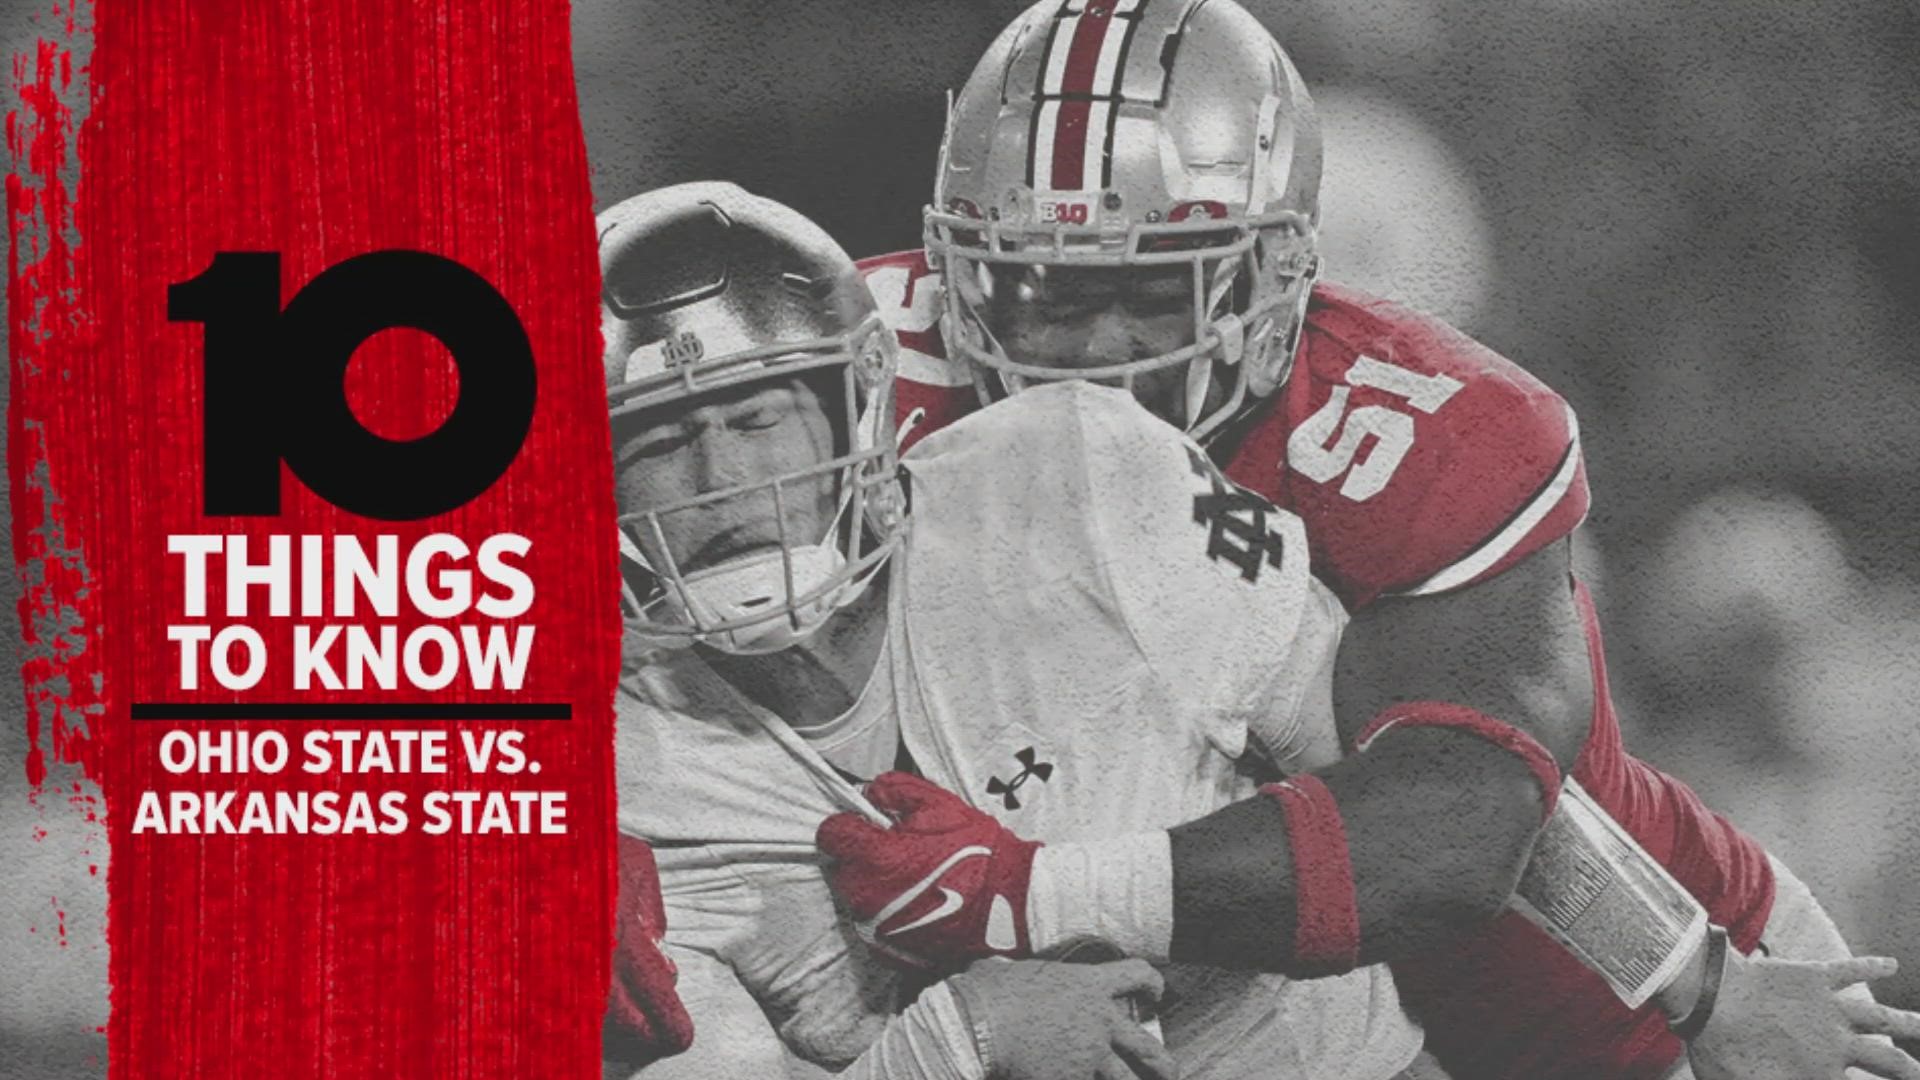 The Buckeyes and the Red Wolves are meeting for the first time ever on Saturday.